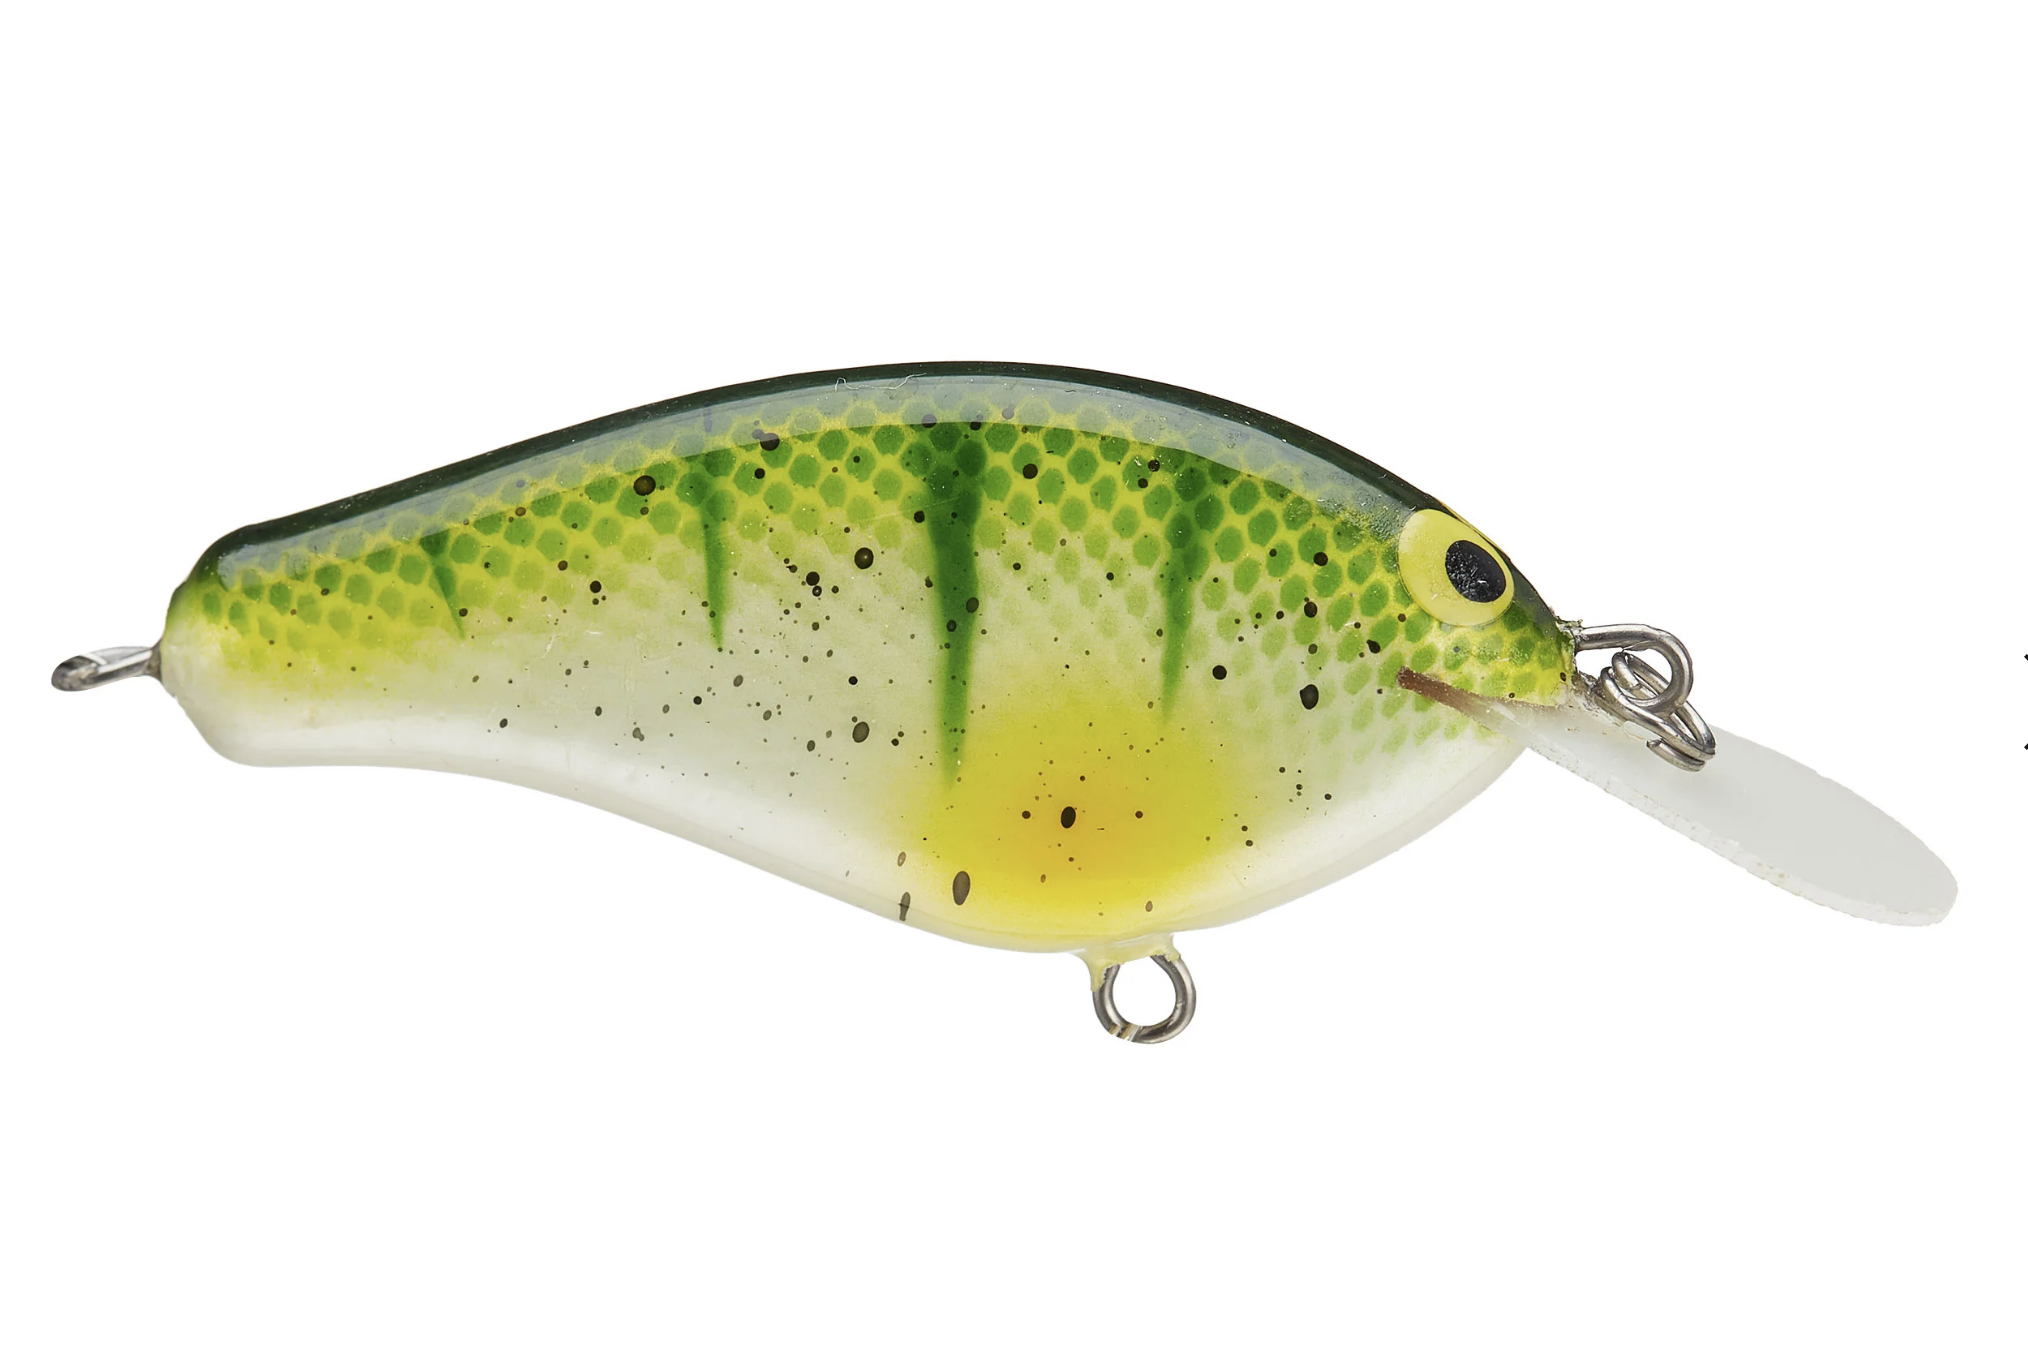 Skinny P - Modern Outdoor Tackle